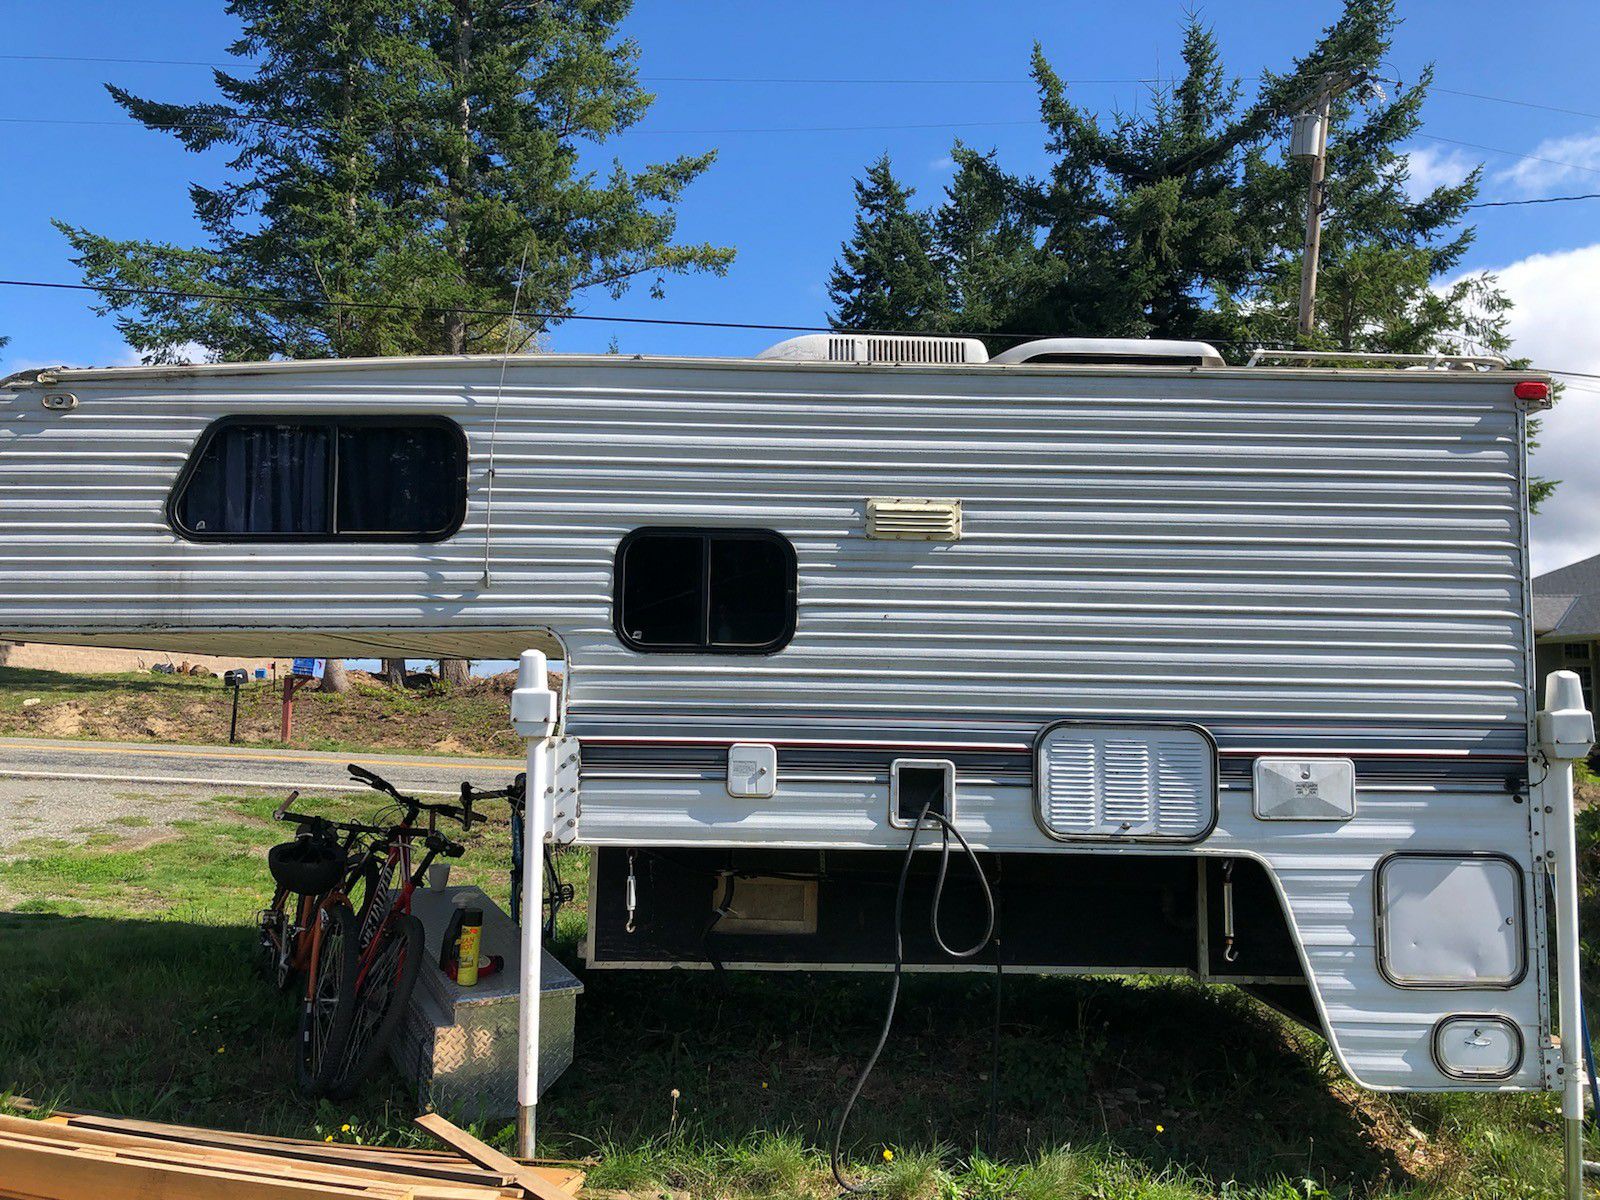 95 Northland camper 12ft everything works title in hand